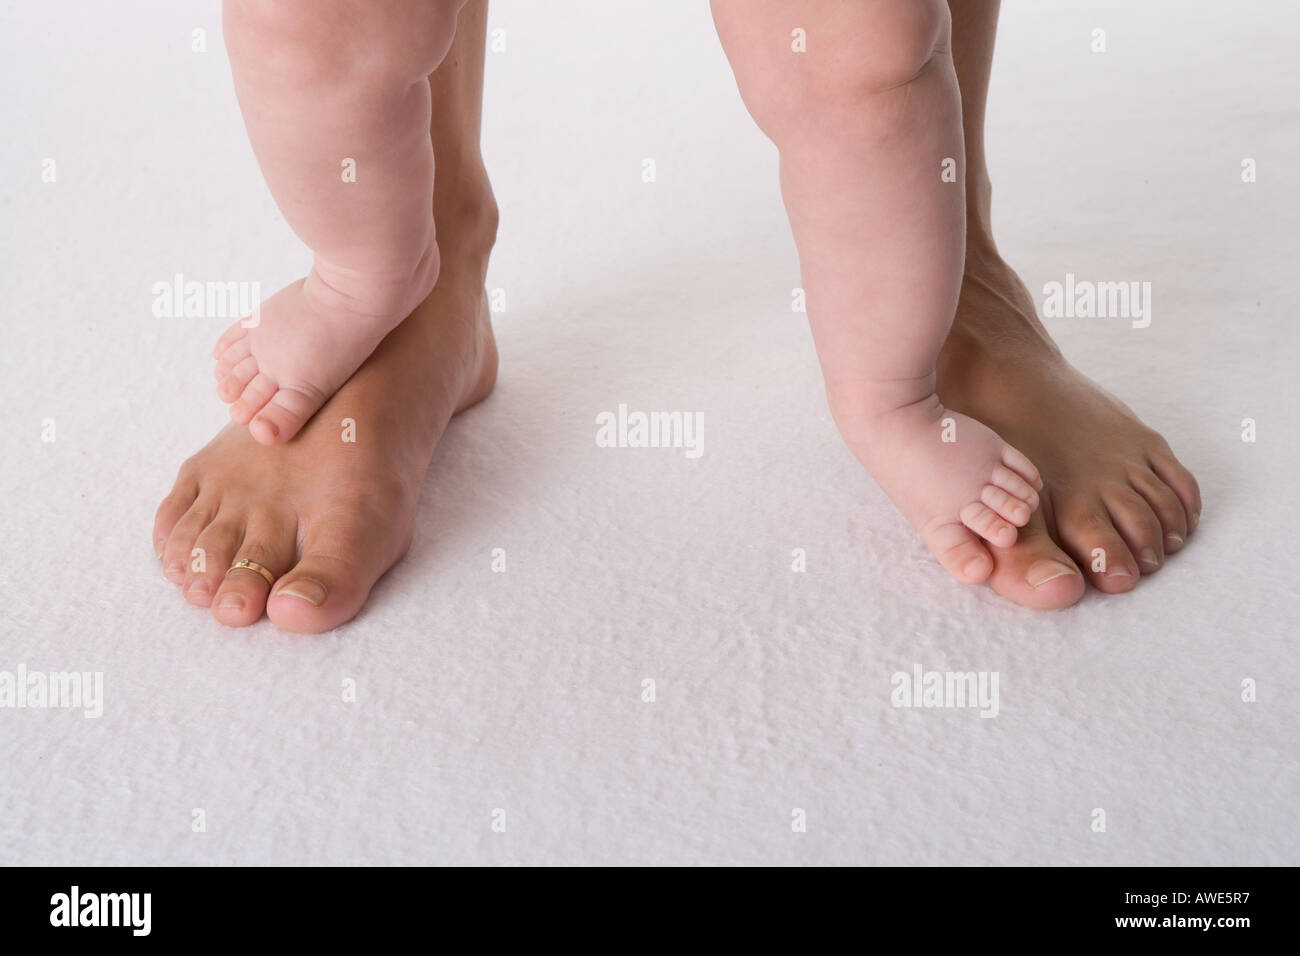 Two baby feet on two large feet Stock Photo